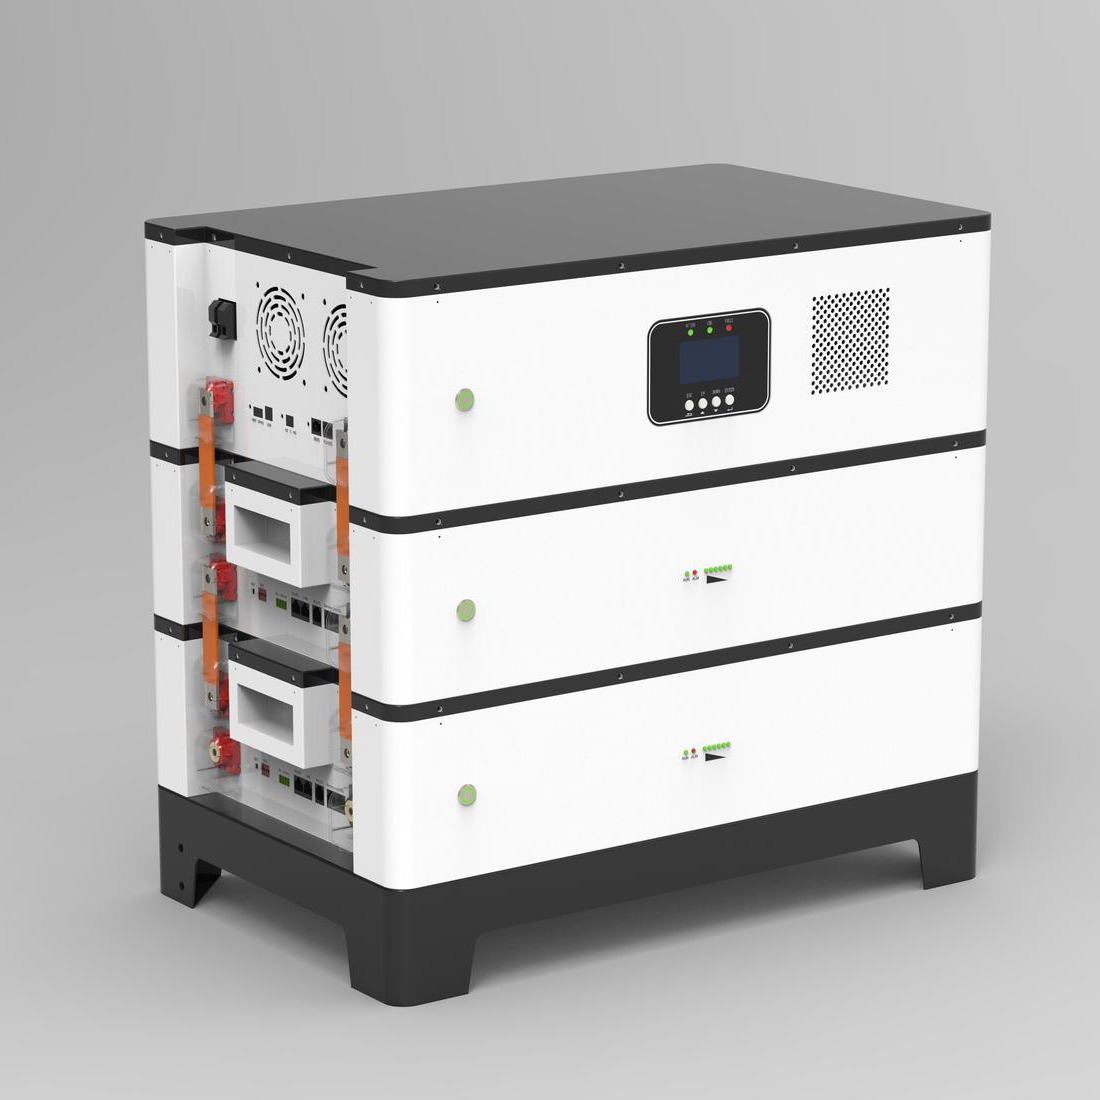 RJ TECH AC Battery System Powerwall 2 Ac Coupled Retrofit Any PV Inverters for Existing PV System